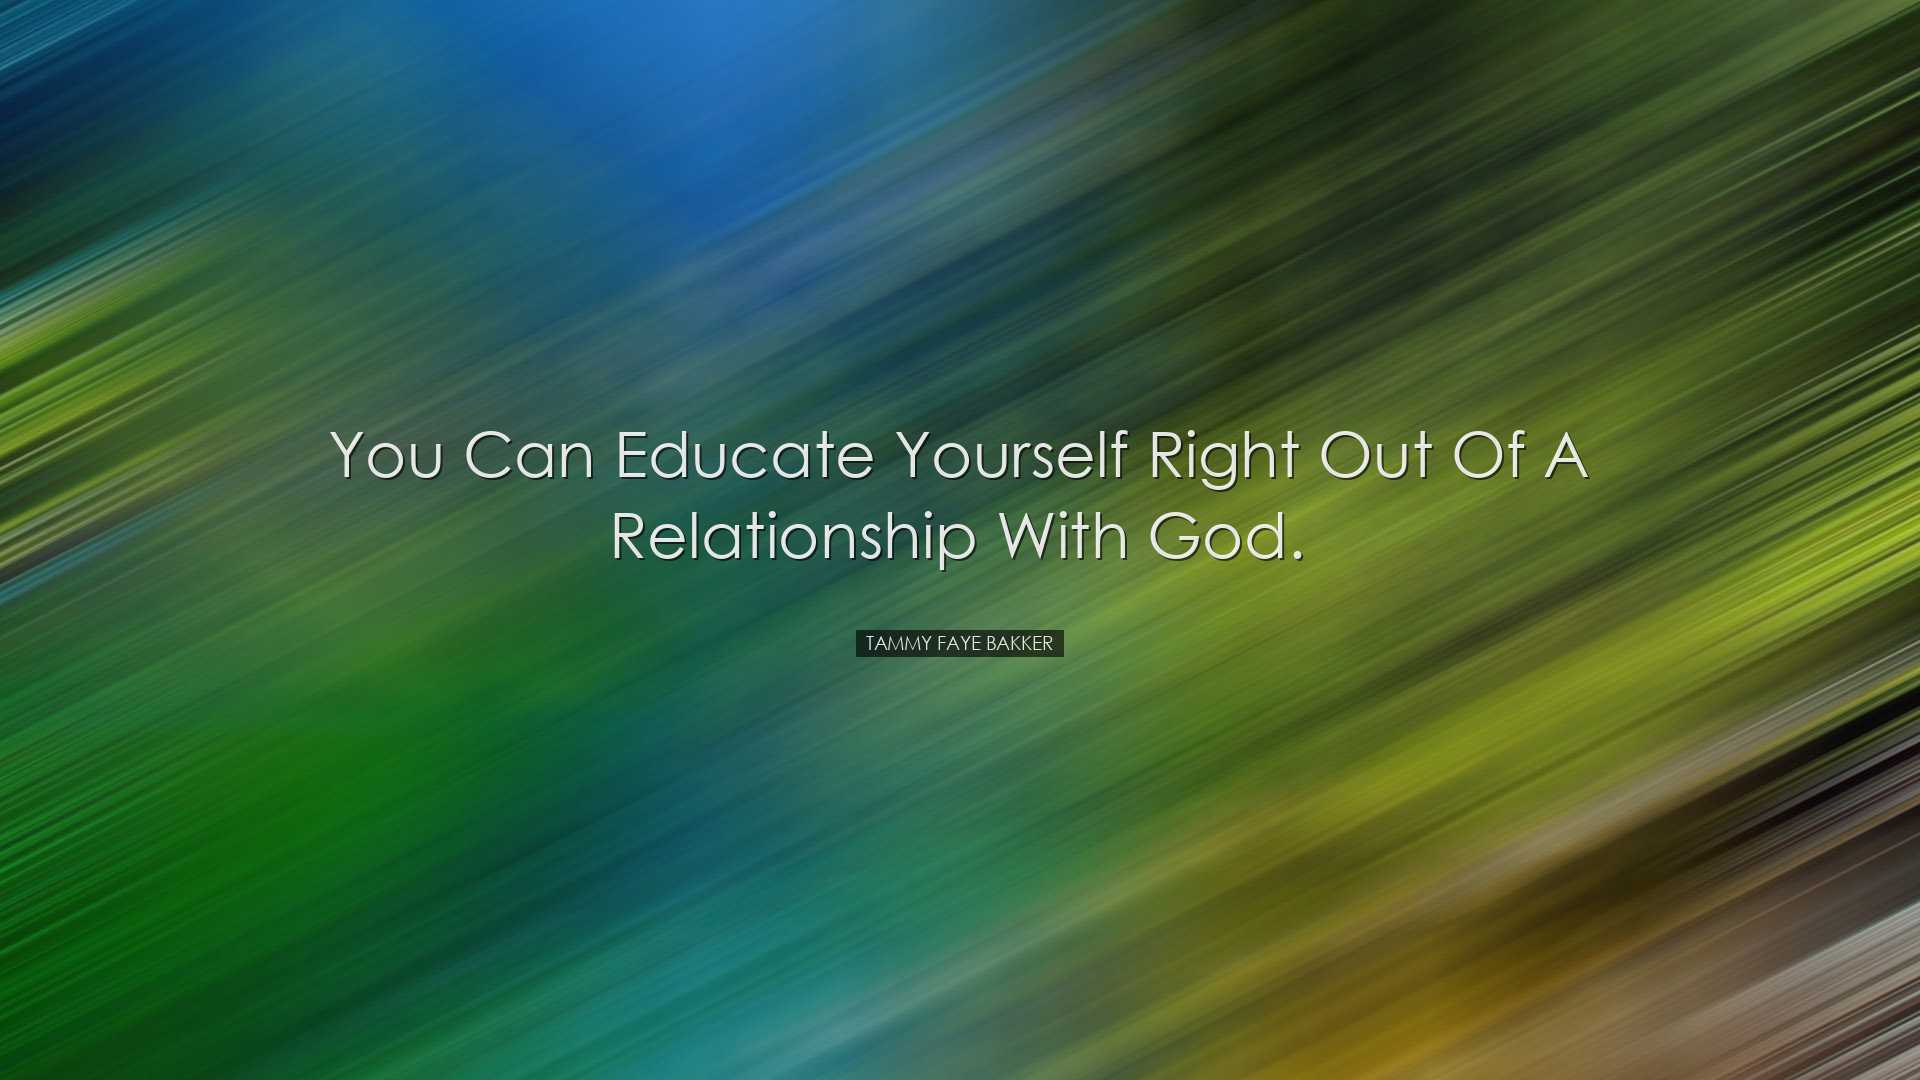 You can educate yourself right out of a relationship with God. - T